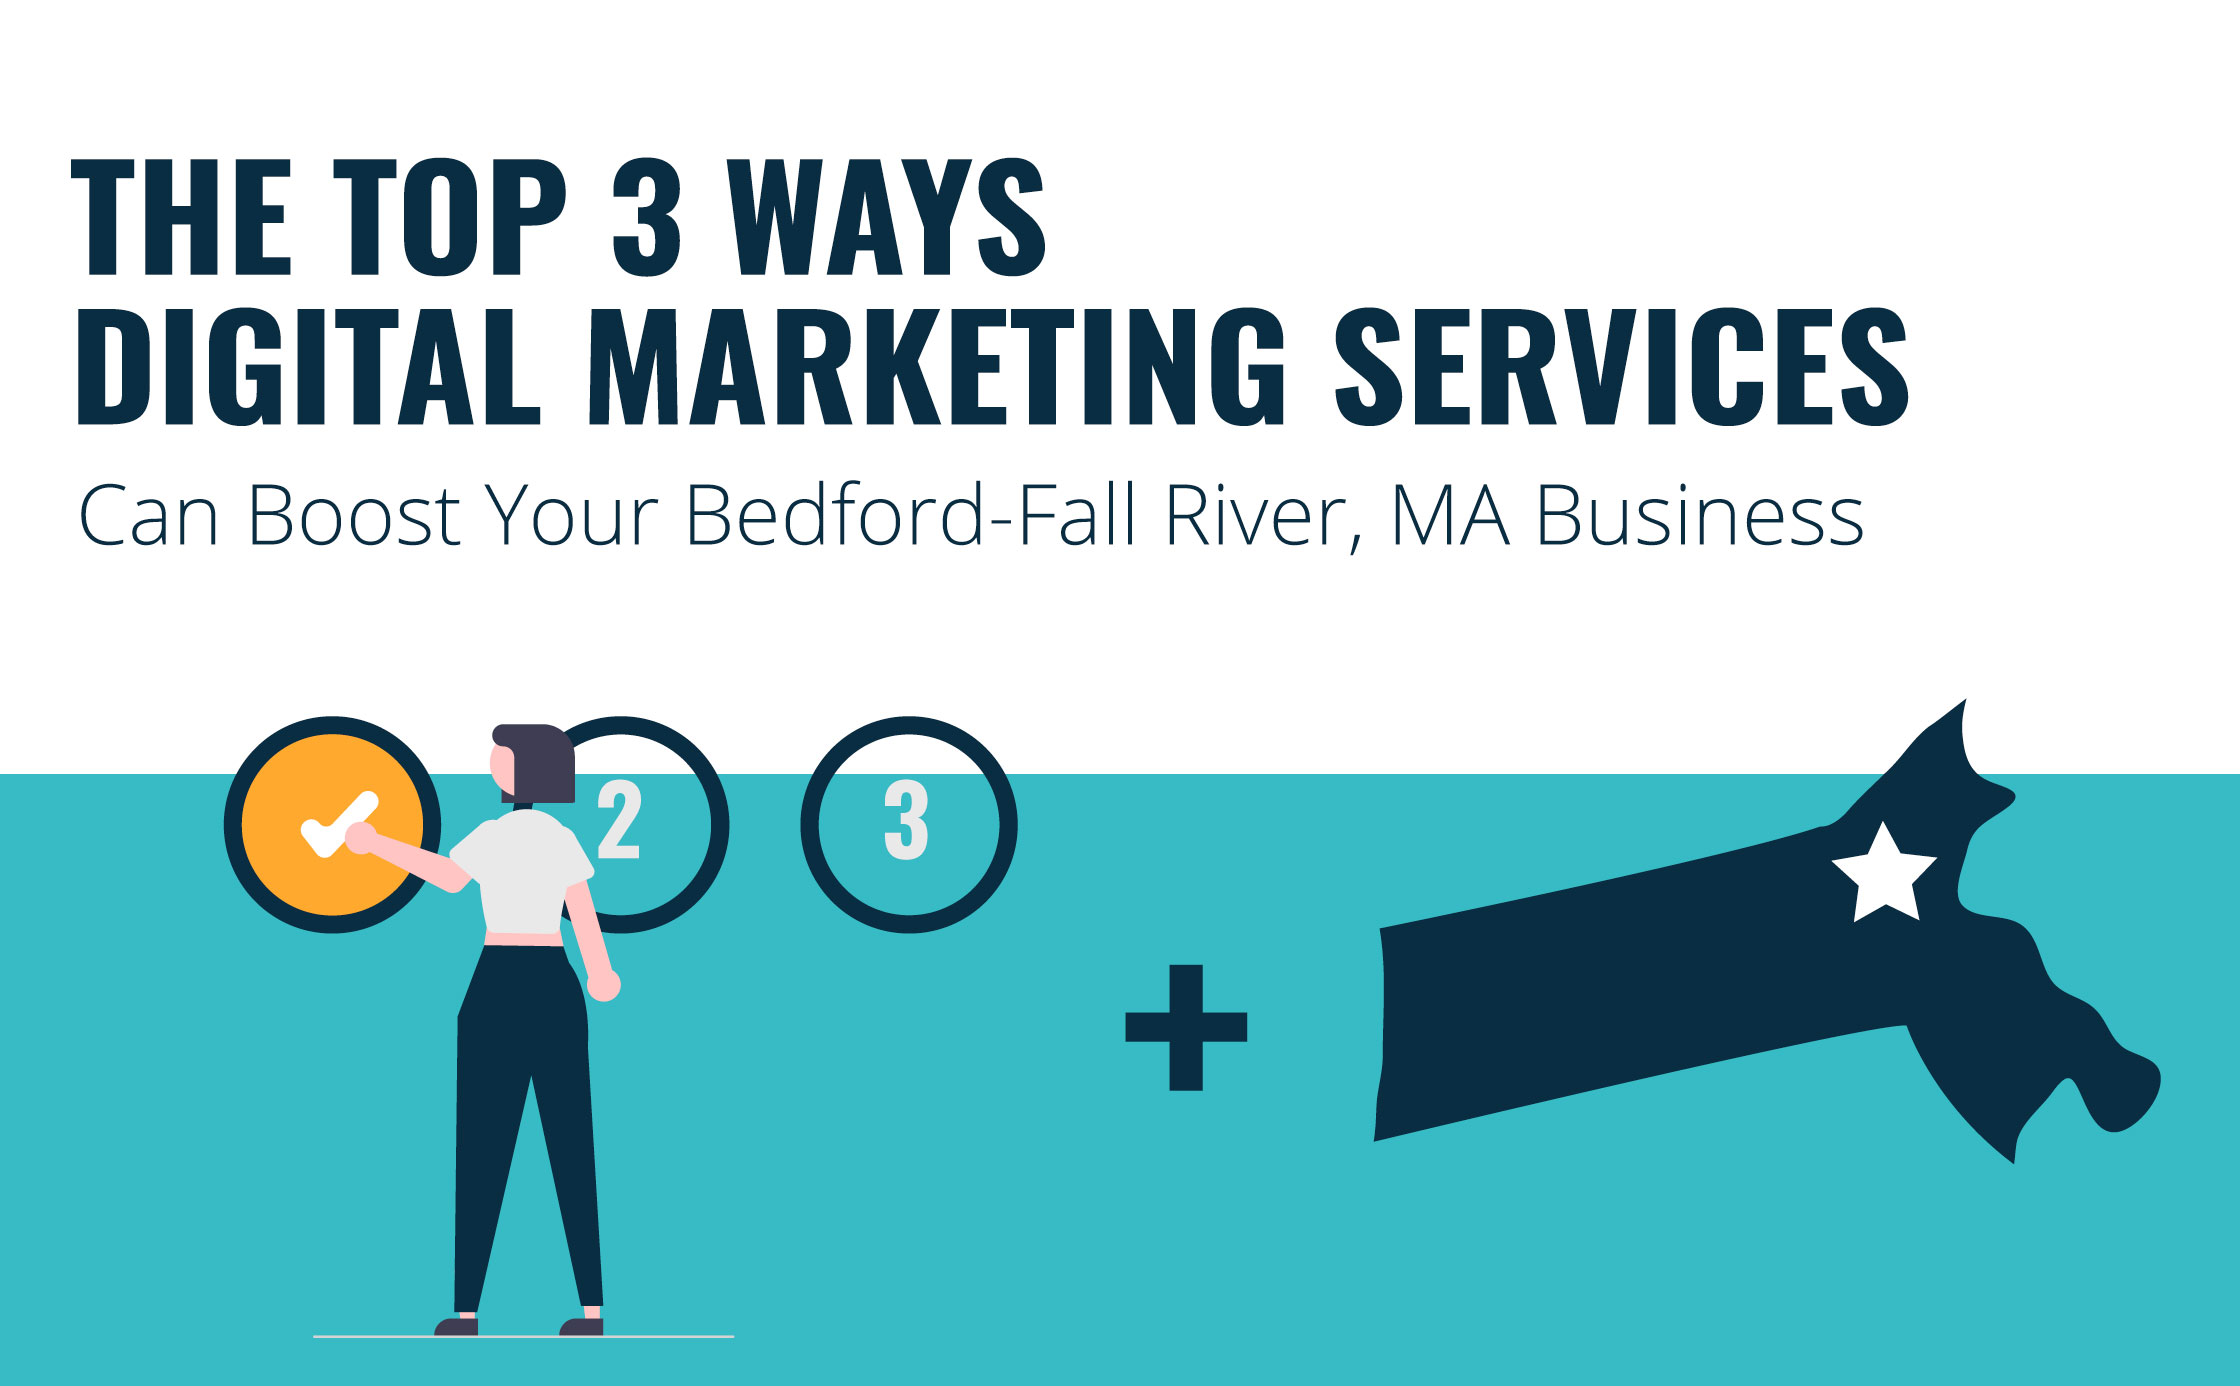 Top 3 Ways Digital Marketing Services Can Boost Your New Bedford-Fall River, MA Business